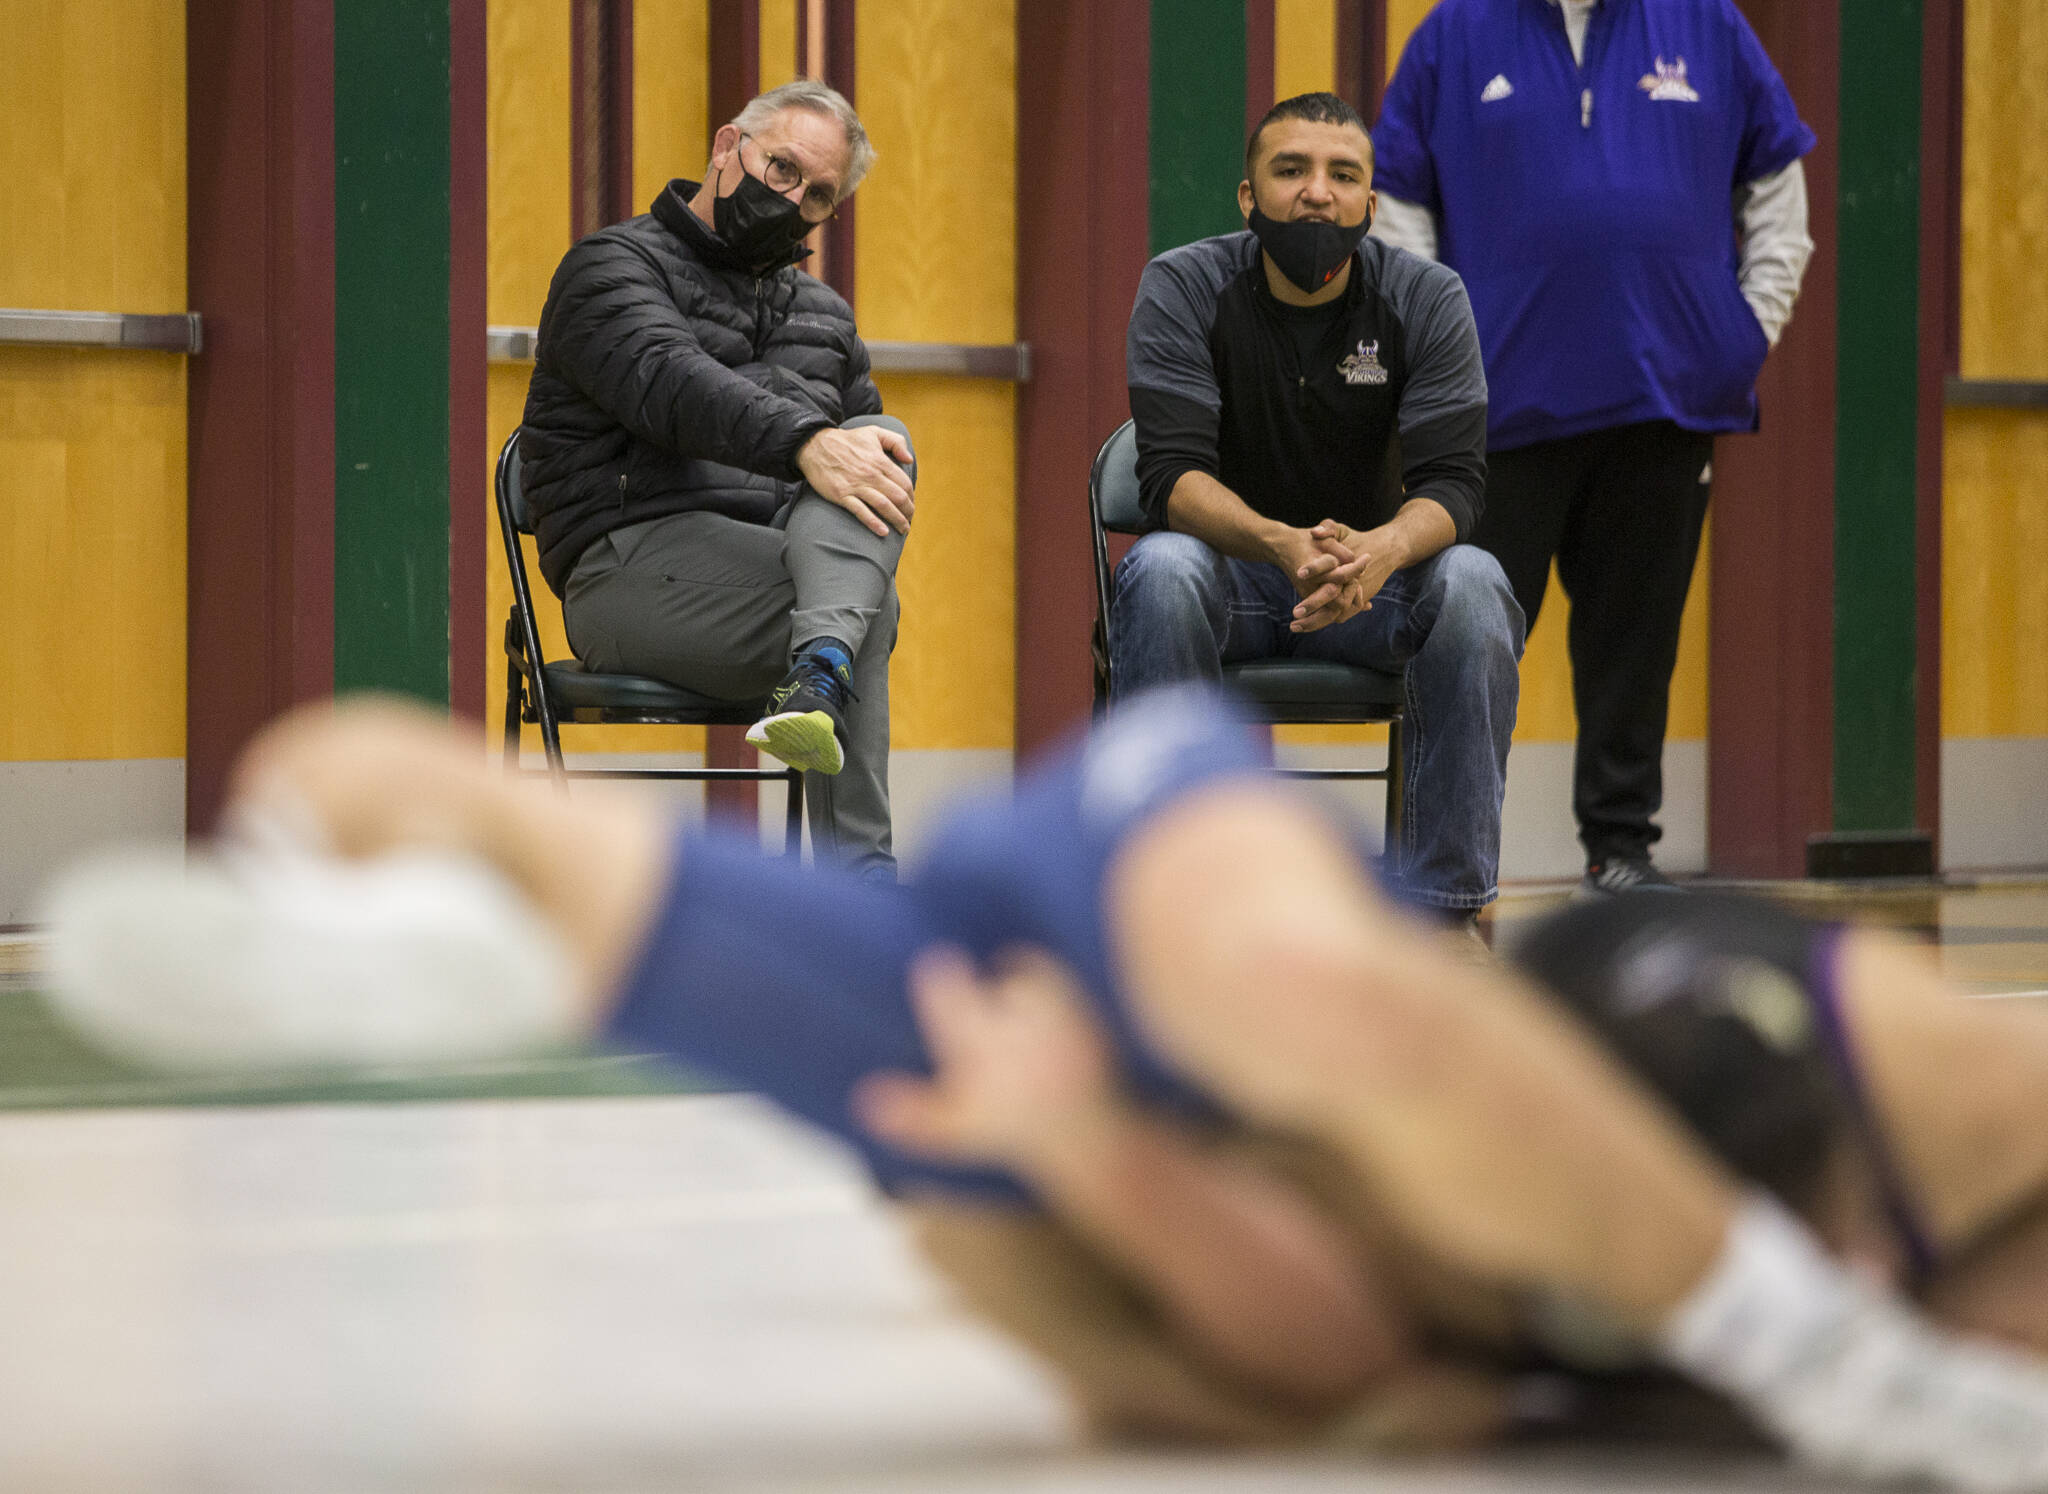 Lake Stevens head wrestling coach Brent Barnes (left) watches one of his wrestlers during at match at the Wesco 4A sub-regional tournament at Henry M. Jackson High School on Feb. 5 in Everett. (Olivia Vanni / The Herald)